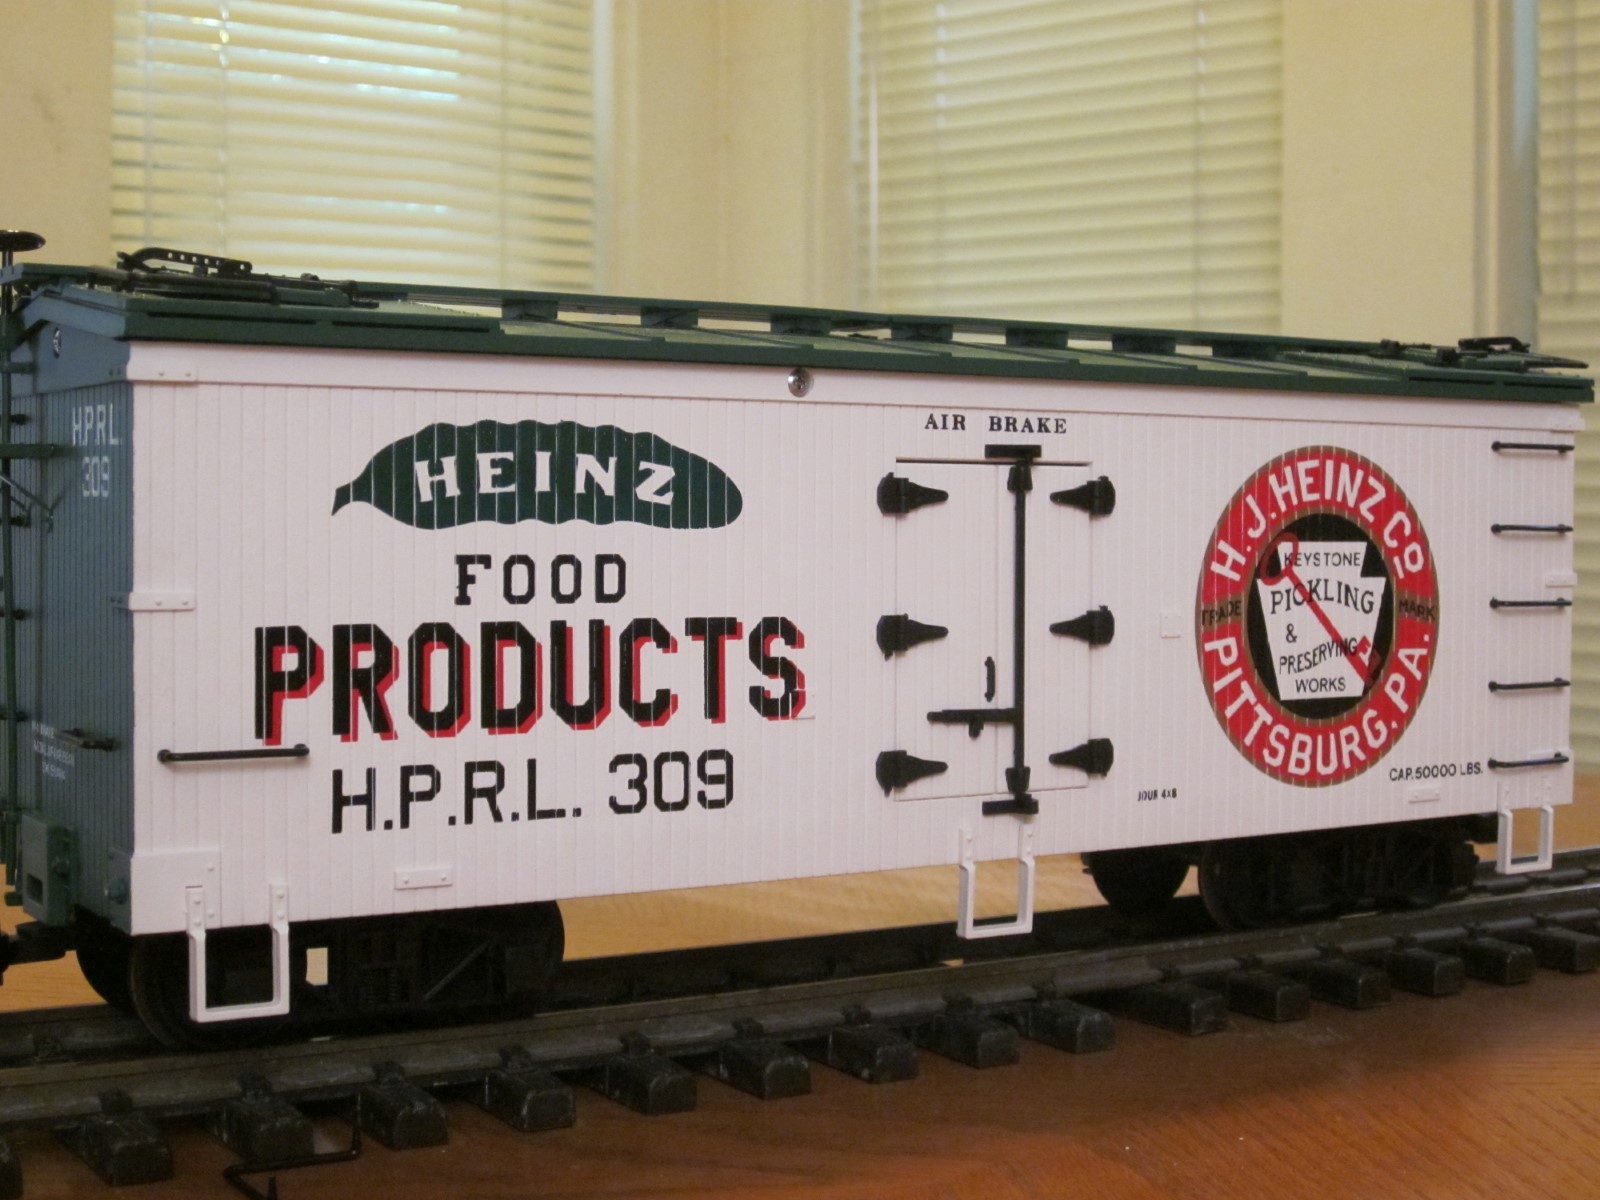 R1629 Heinz Food Products HPRL 309